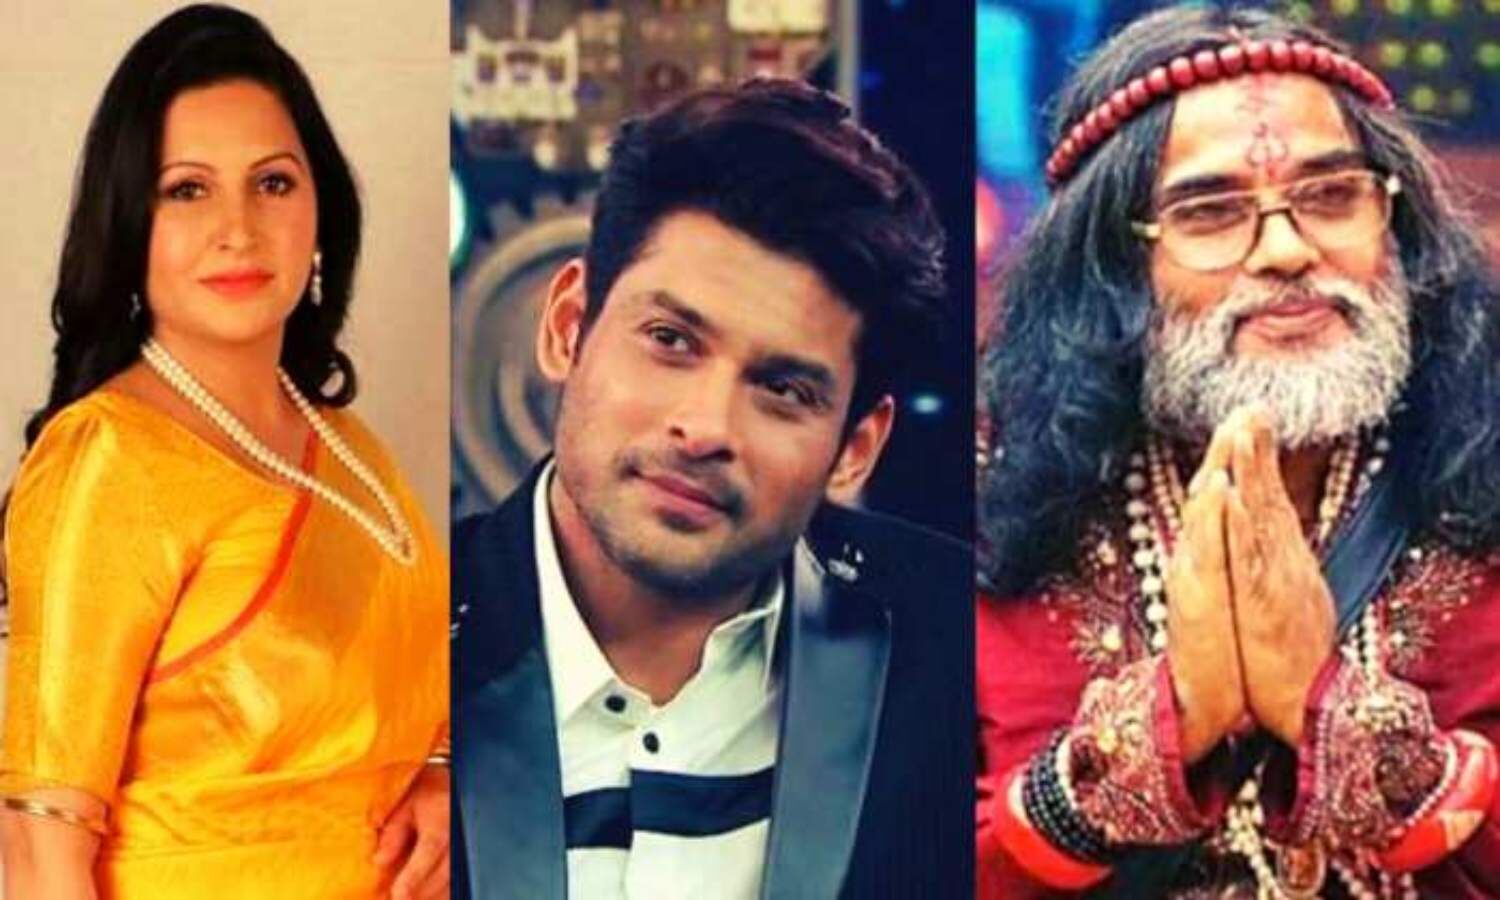 Bigg Boss Contestants Death: The death of these contestants of Bigg Boss surprised everyone, Raju Srivastava too now